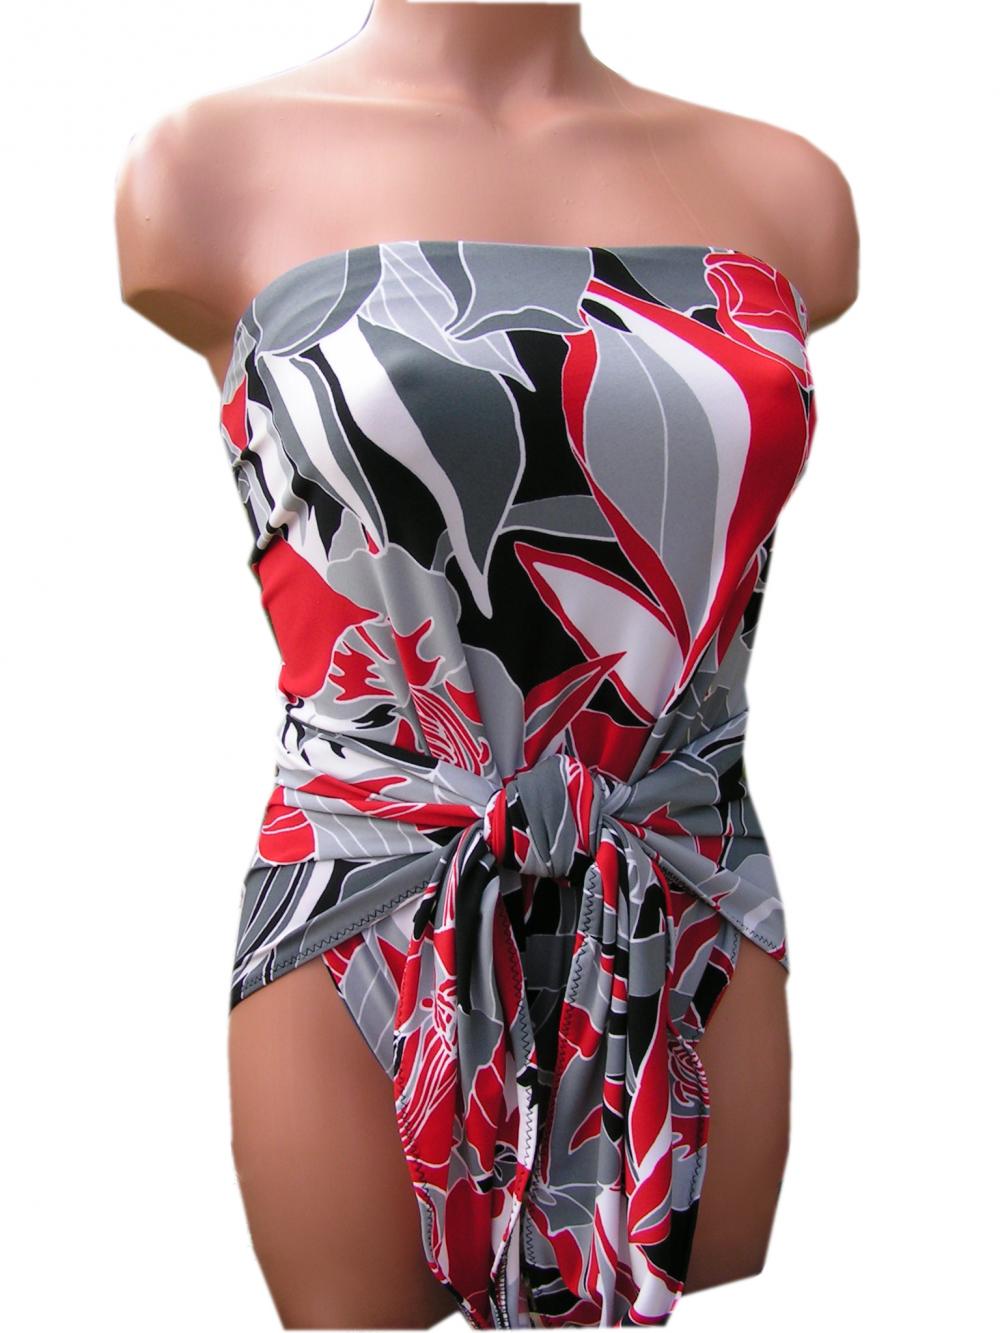 Bathing Suit Medium Wrap-around Swimsuit Red And Grey Flower